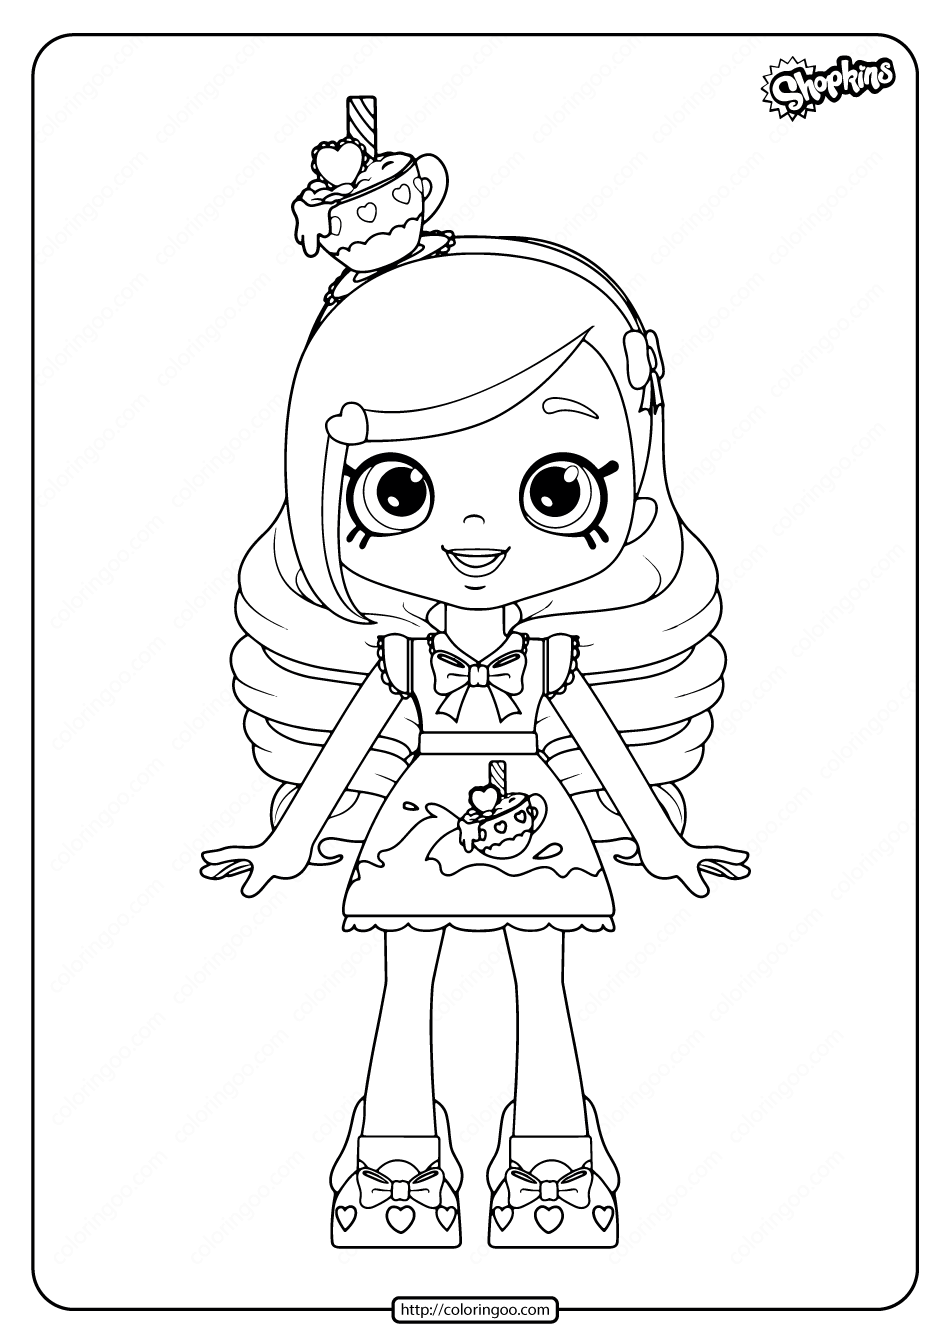 printable shopkins kirstea coloring pages